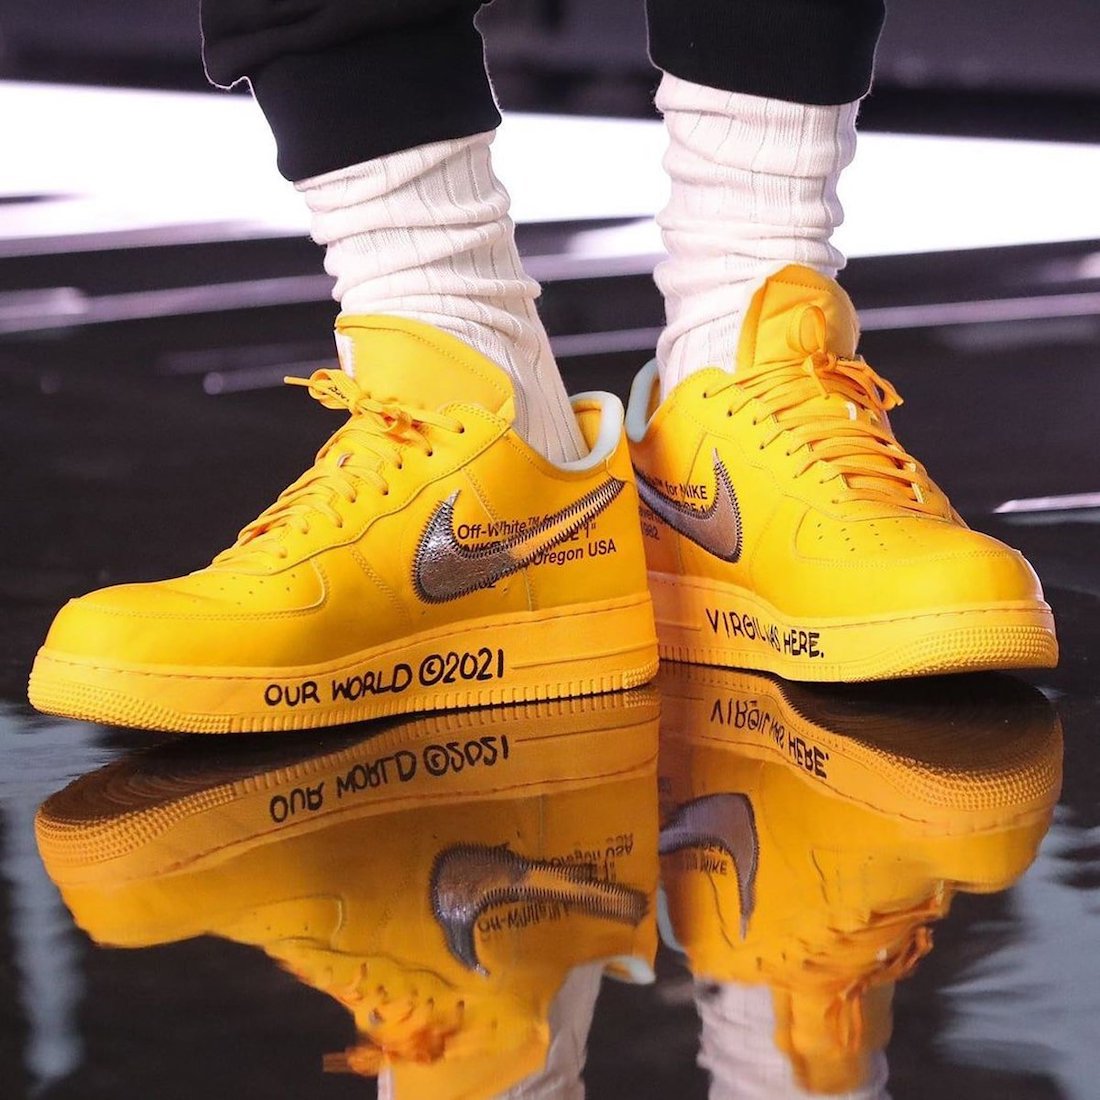 New Look At The Off-White x Nike Air Force 1 Low “University Gold”